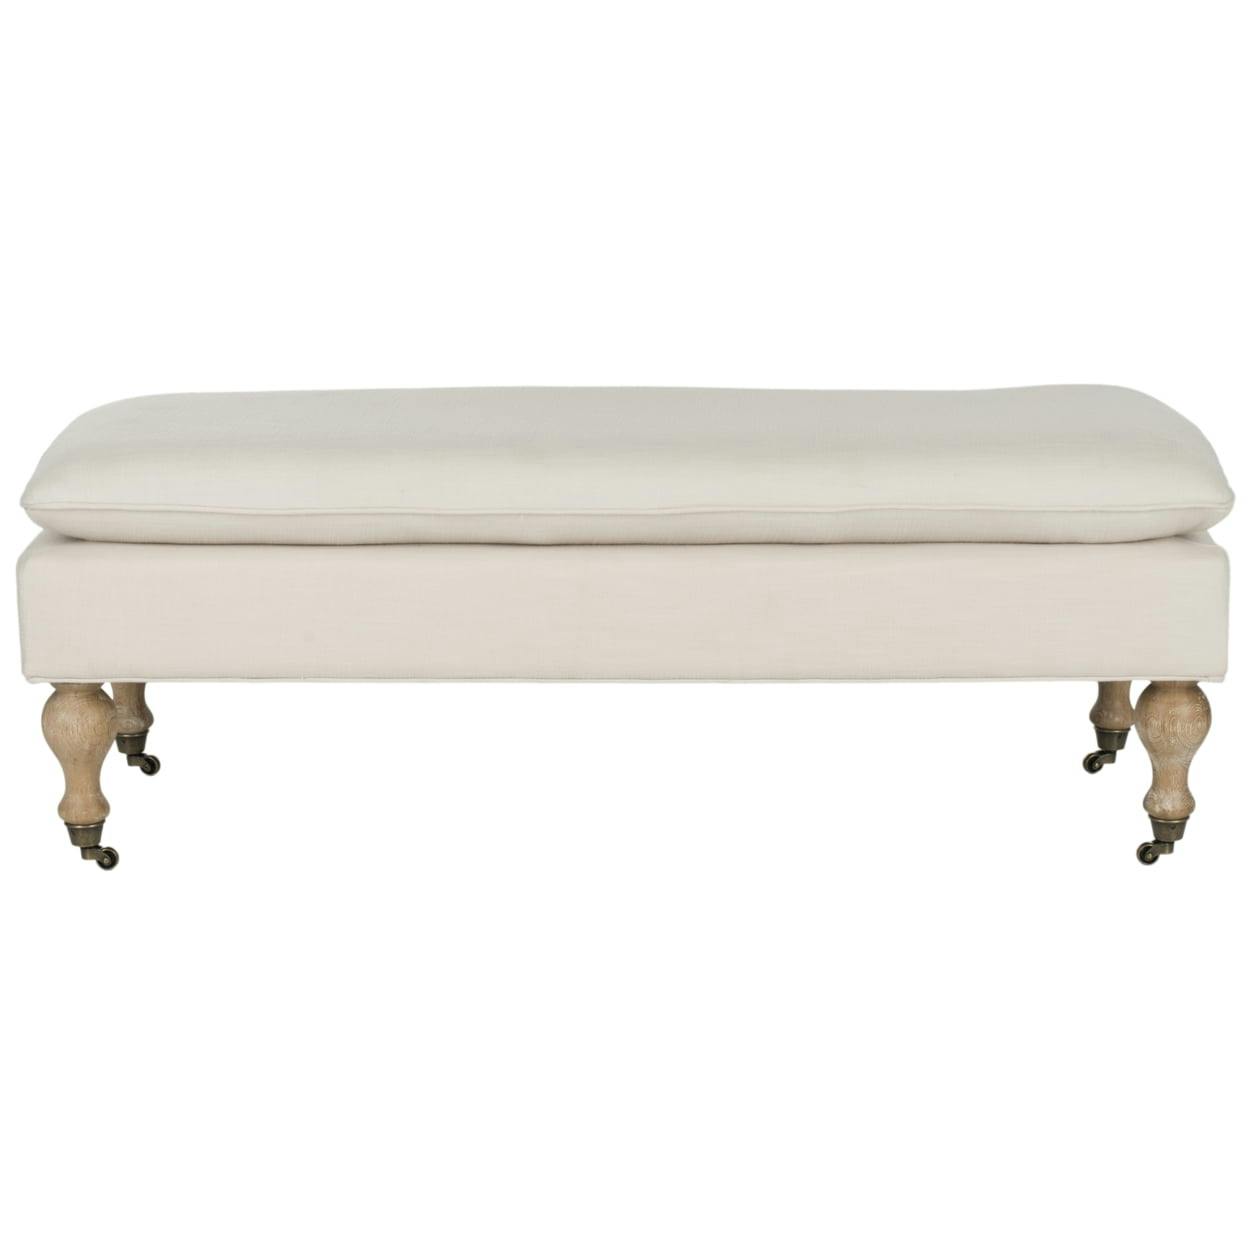 Transitional White Washed Oak and Cream Upholstered Bench/Ottoman